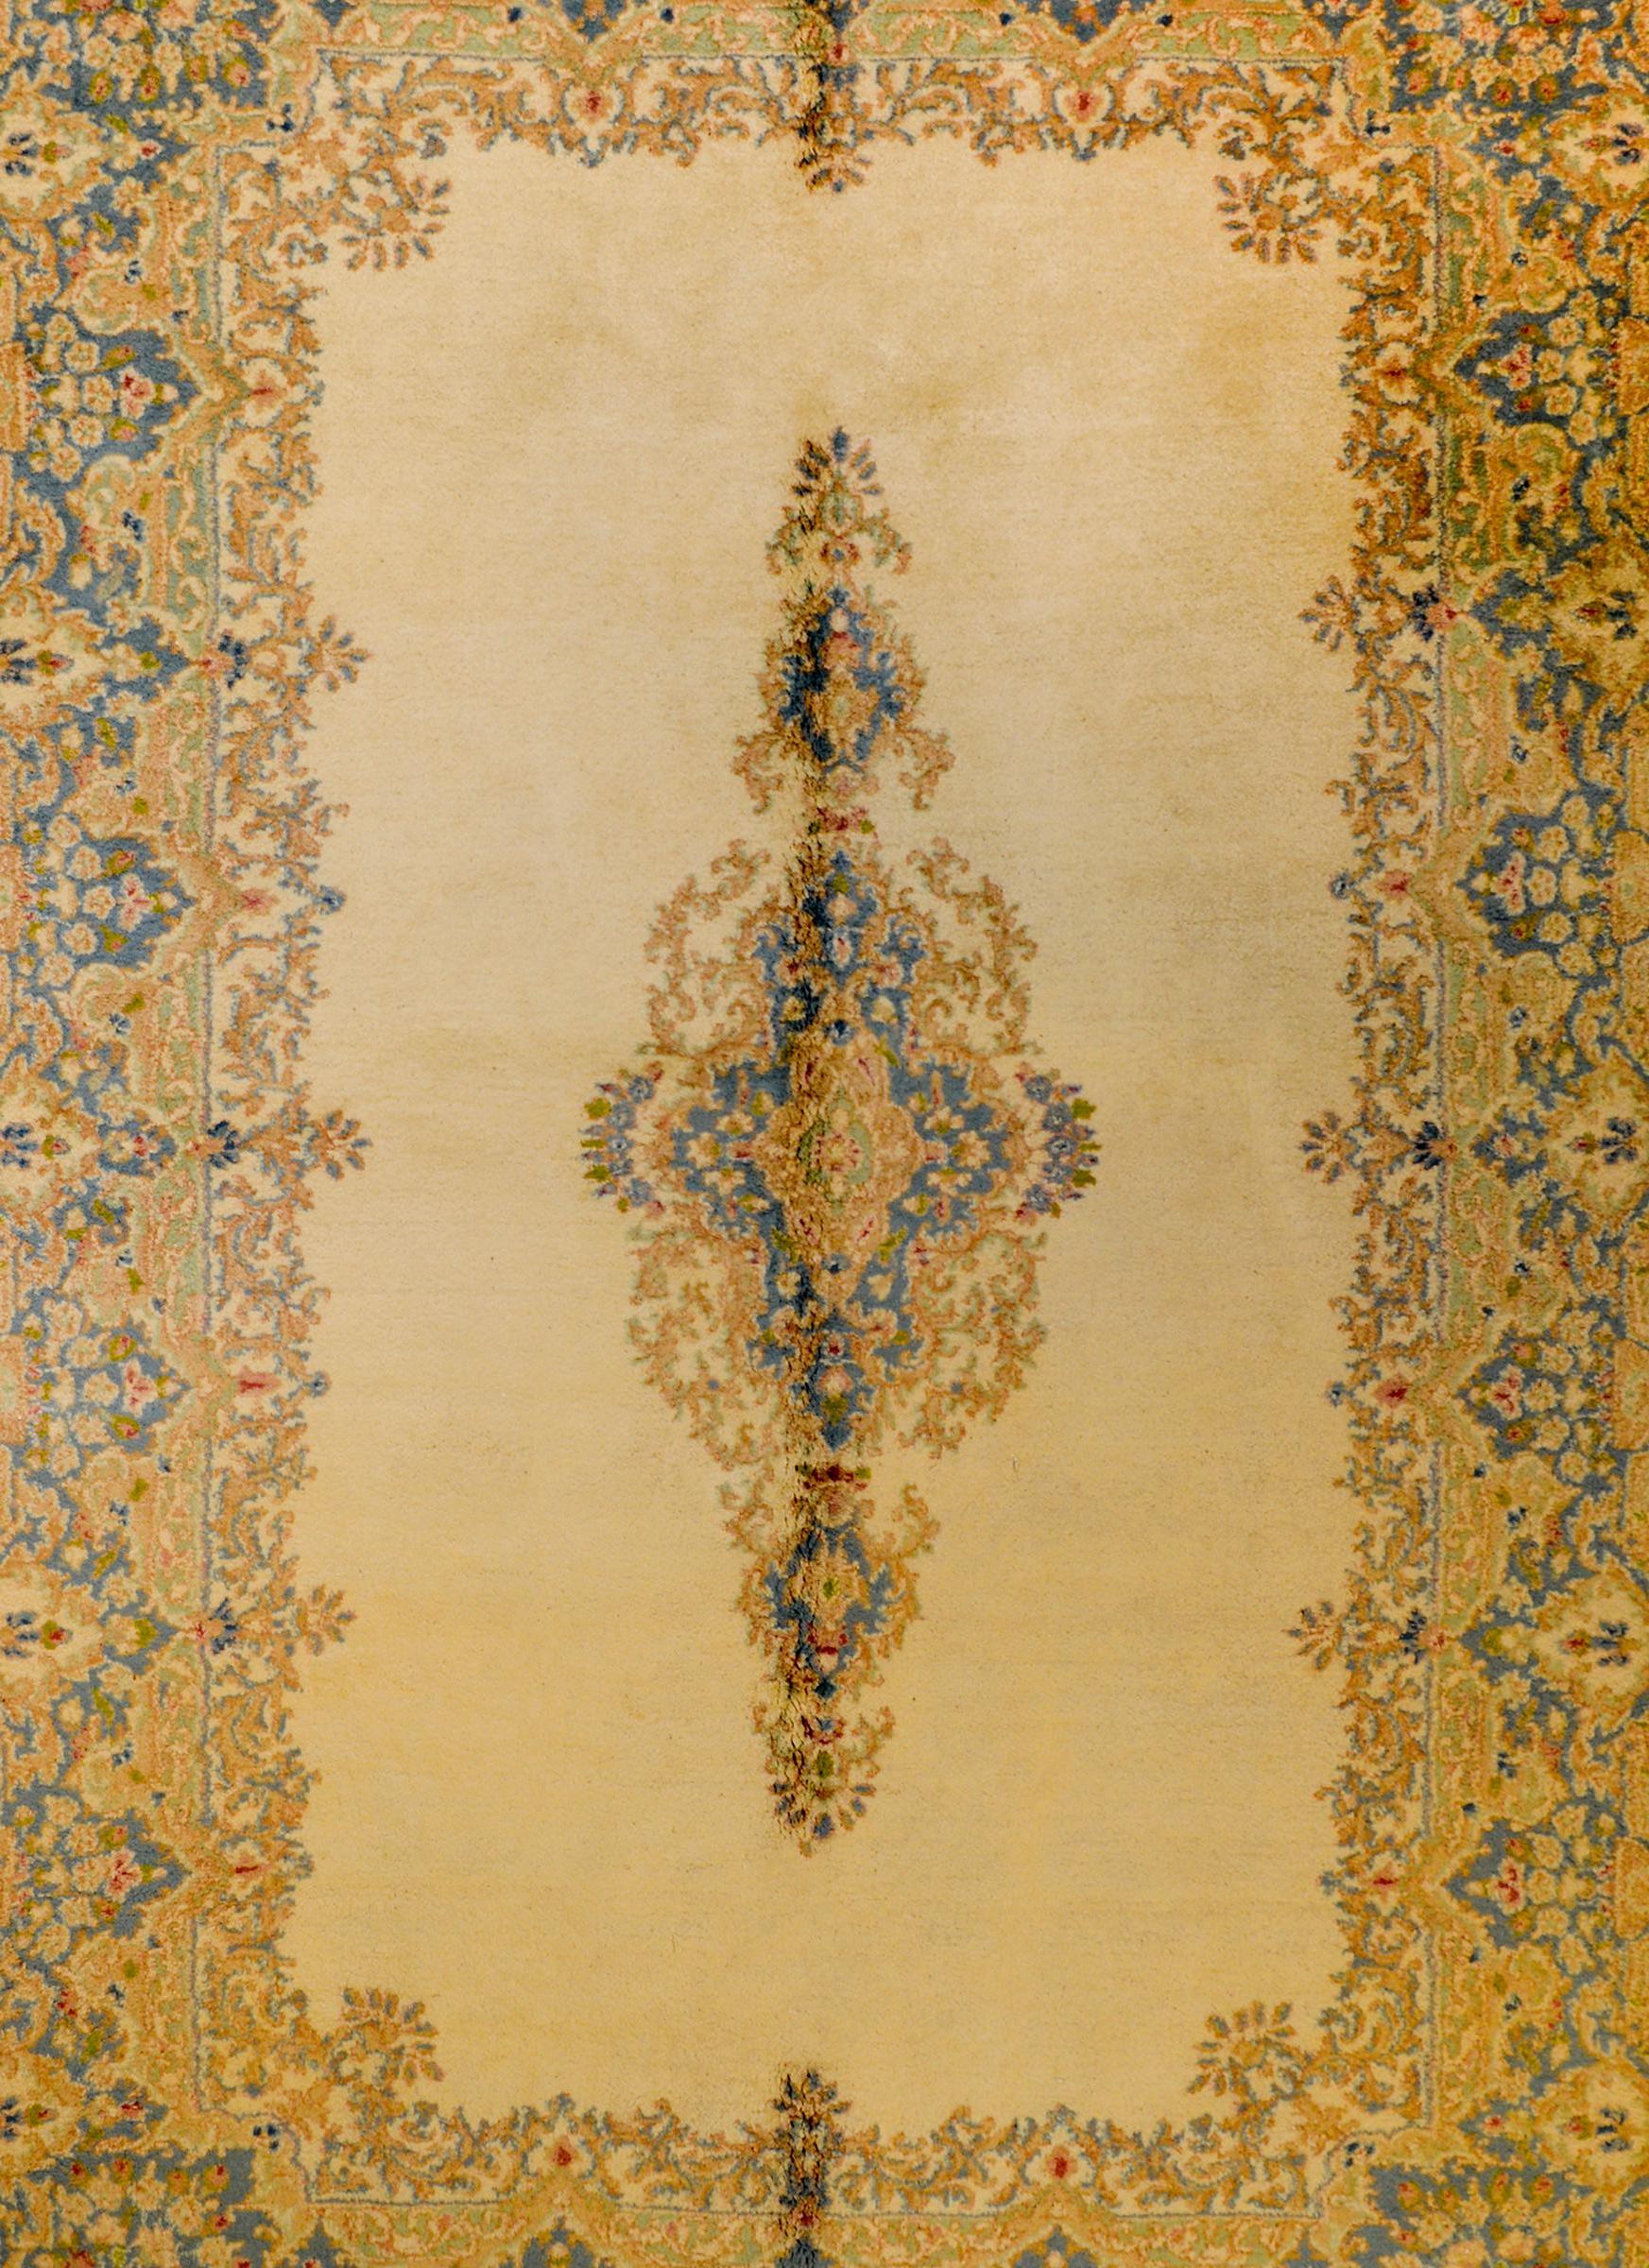 An unusual early 20th century Persian Kirman rug with a long narrow floral medallion woven in indigo, green, gold, and red vegetable dyed wool on a champagne colored ground. The border is wide with a similarly styled pattern as the medallion, but